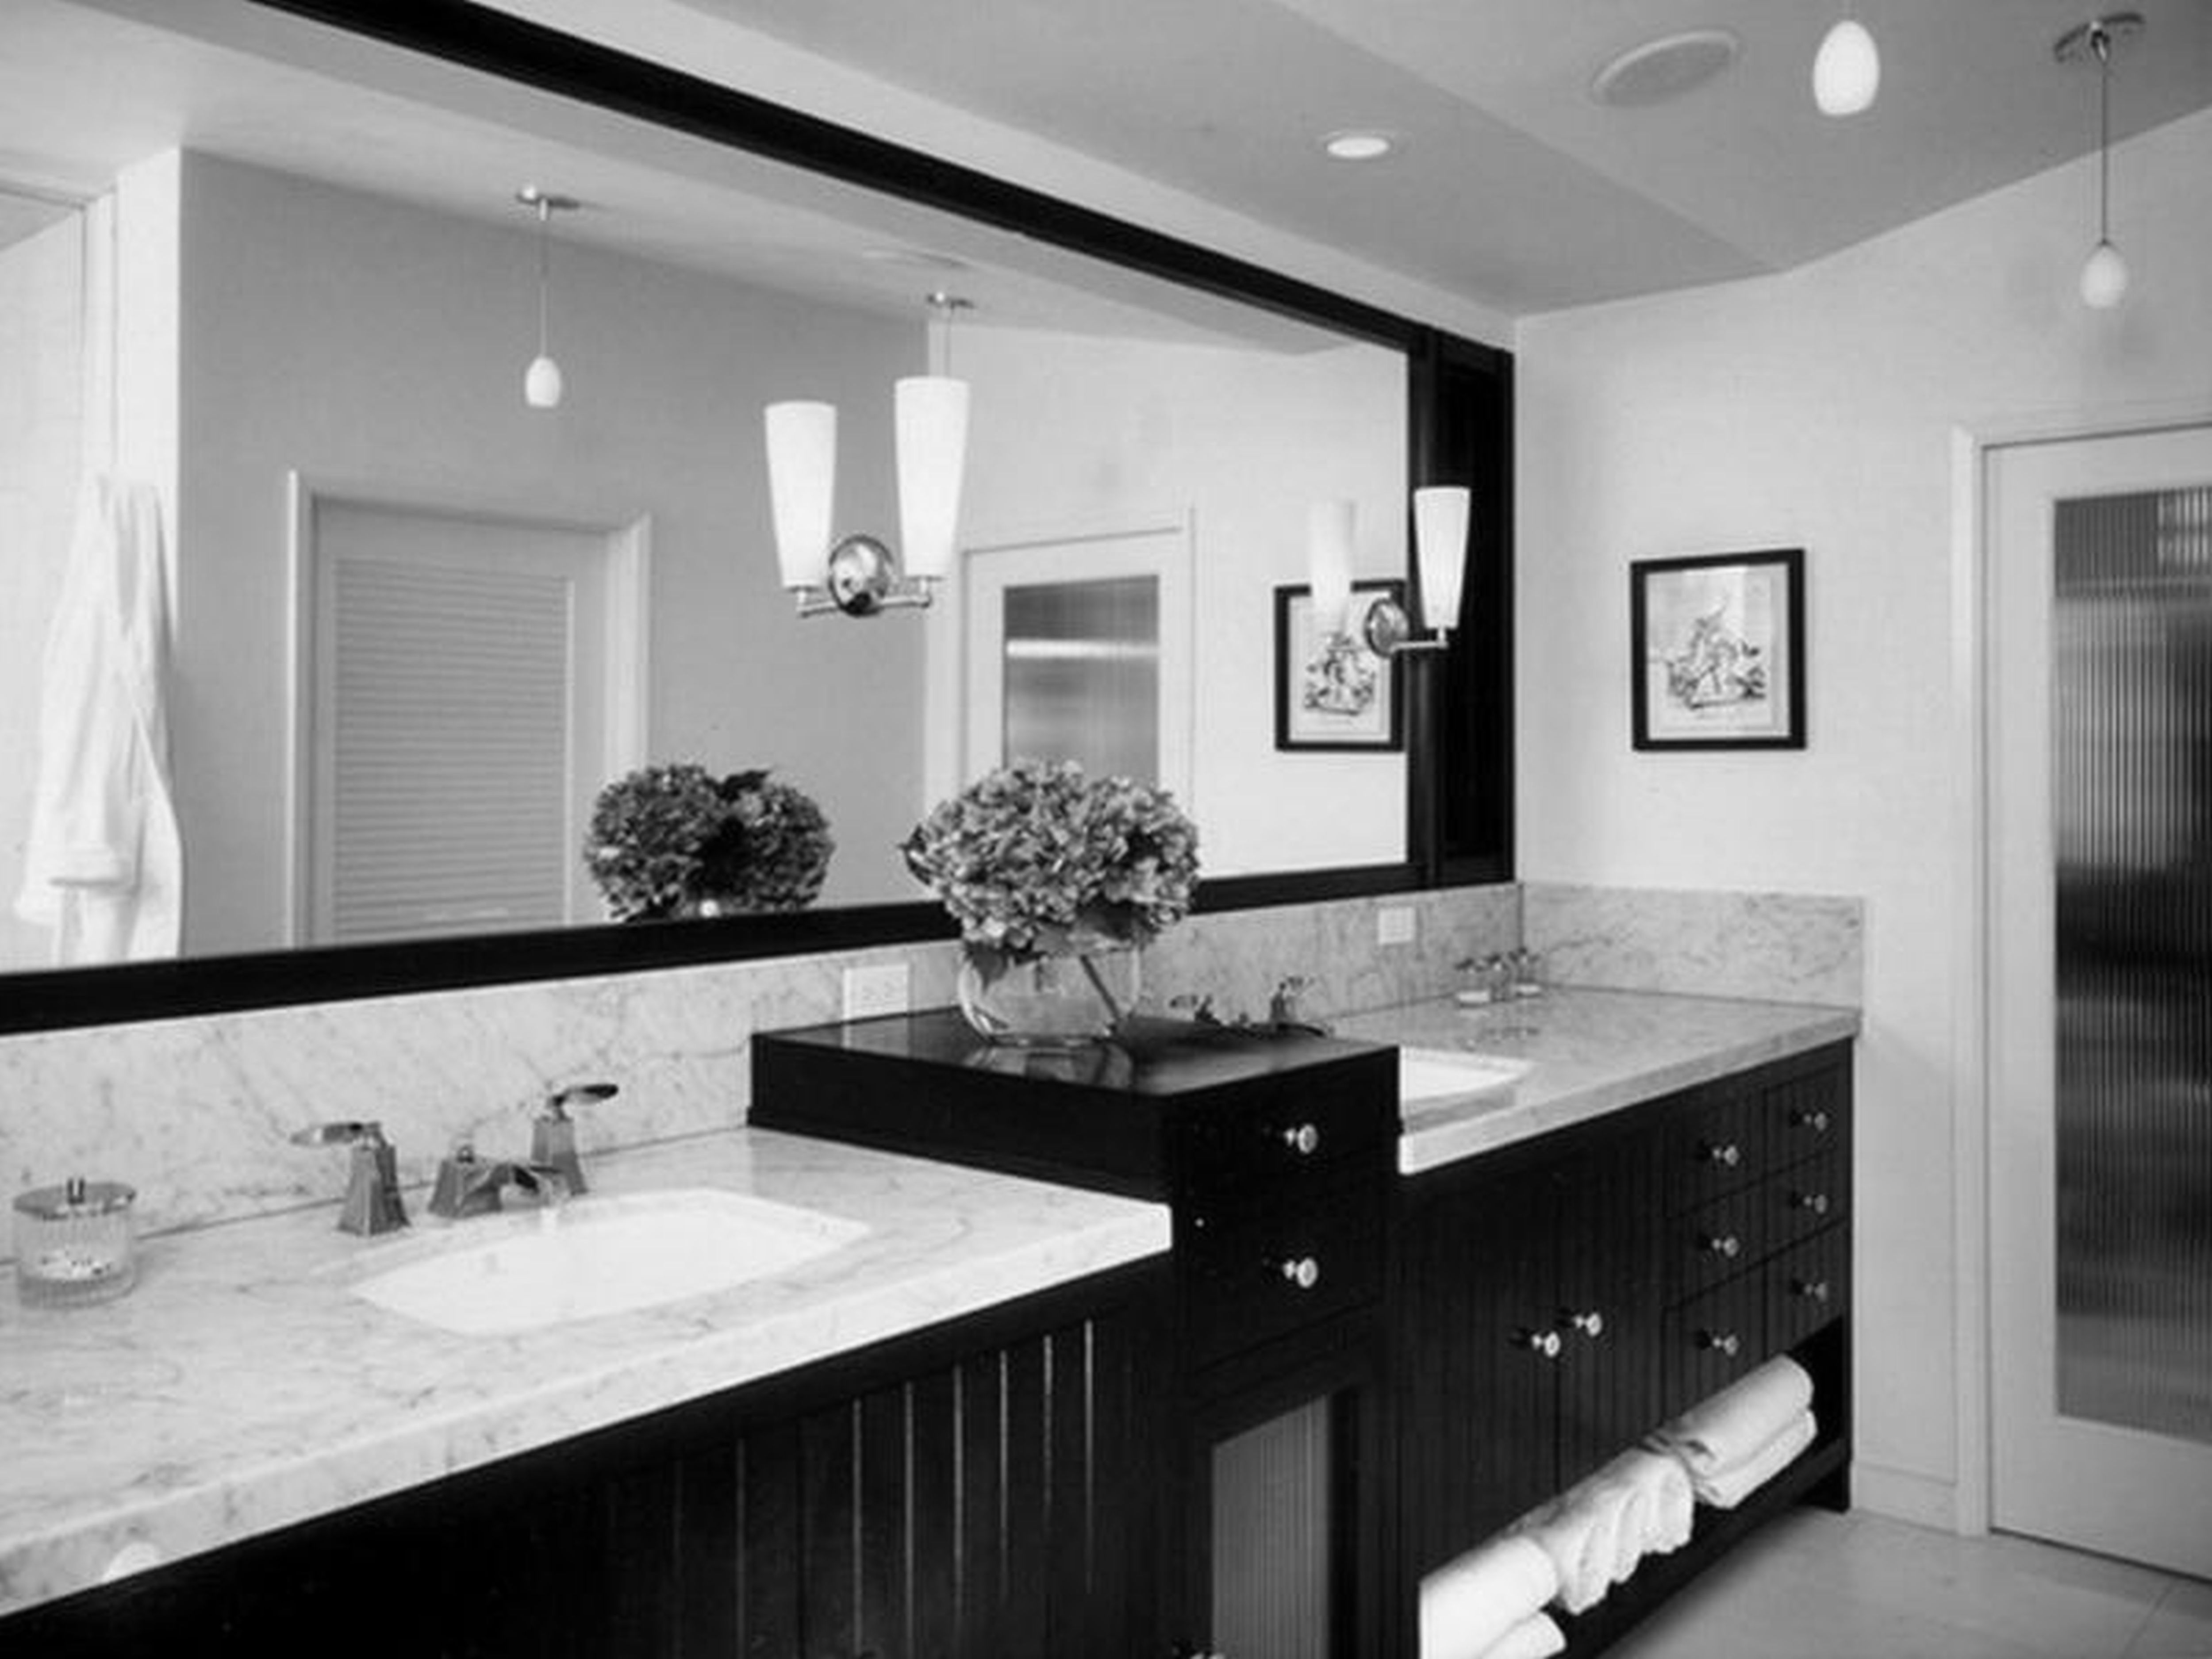 bathroom-black-wooden-bathroom-vanity-with-granite-top-added-by-large-rectangle-black-mirror-on-the-wall-bathroom-decorating-ideas-black-and-white-make-your-bathroom-look-contemporary